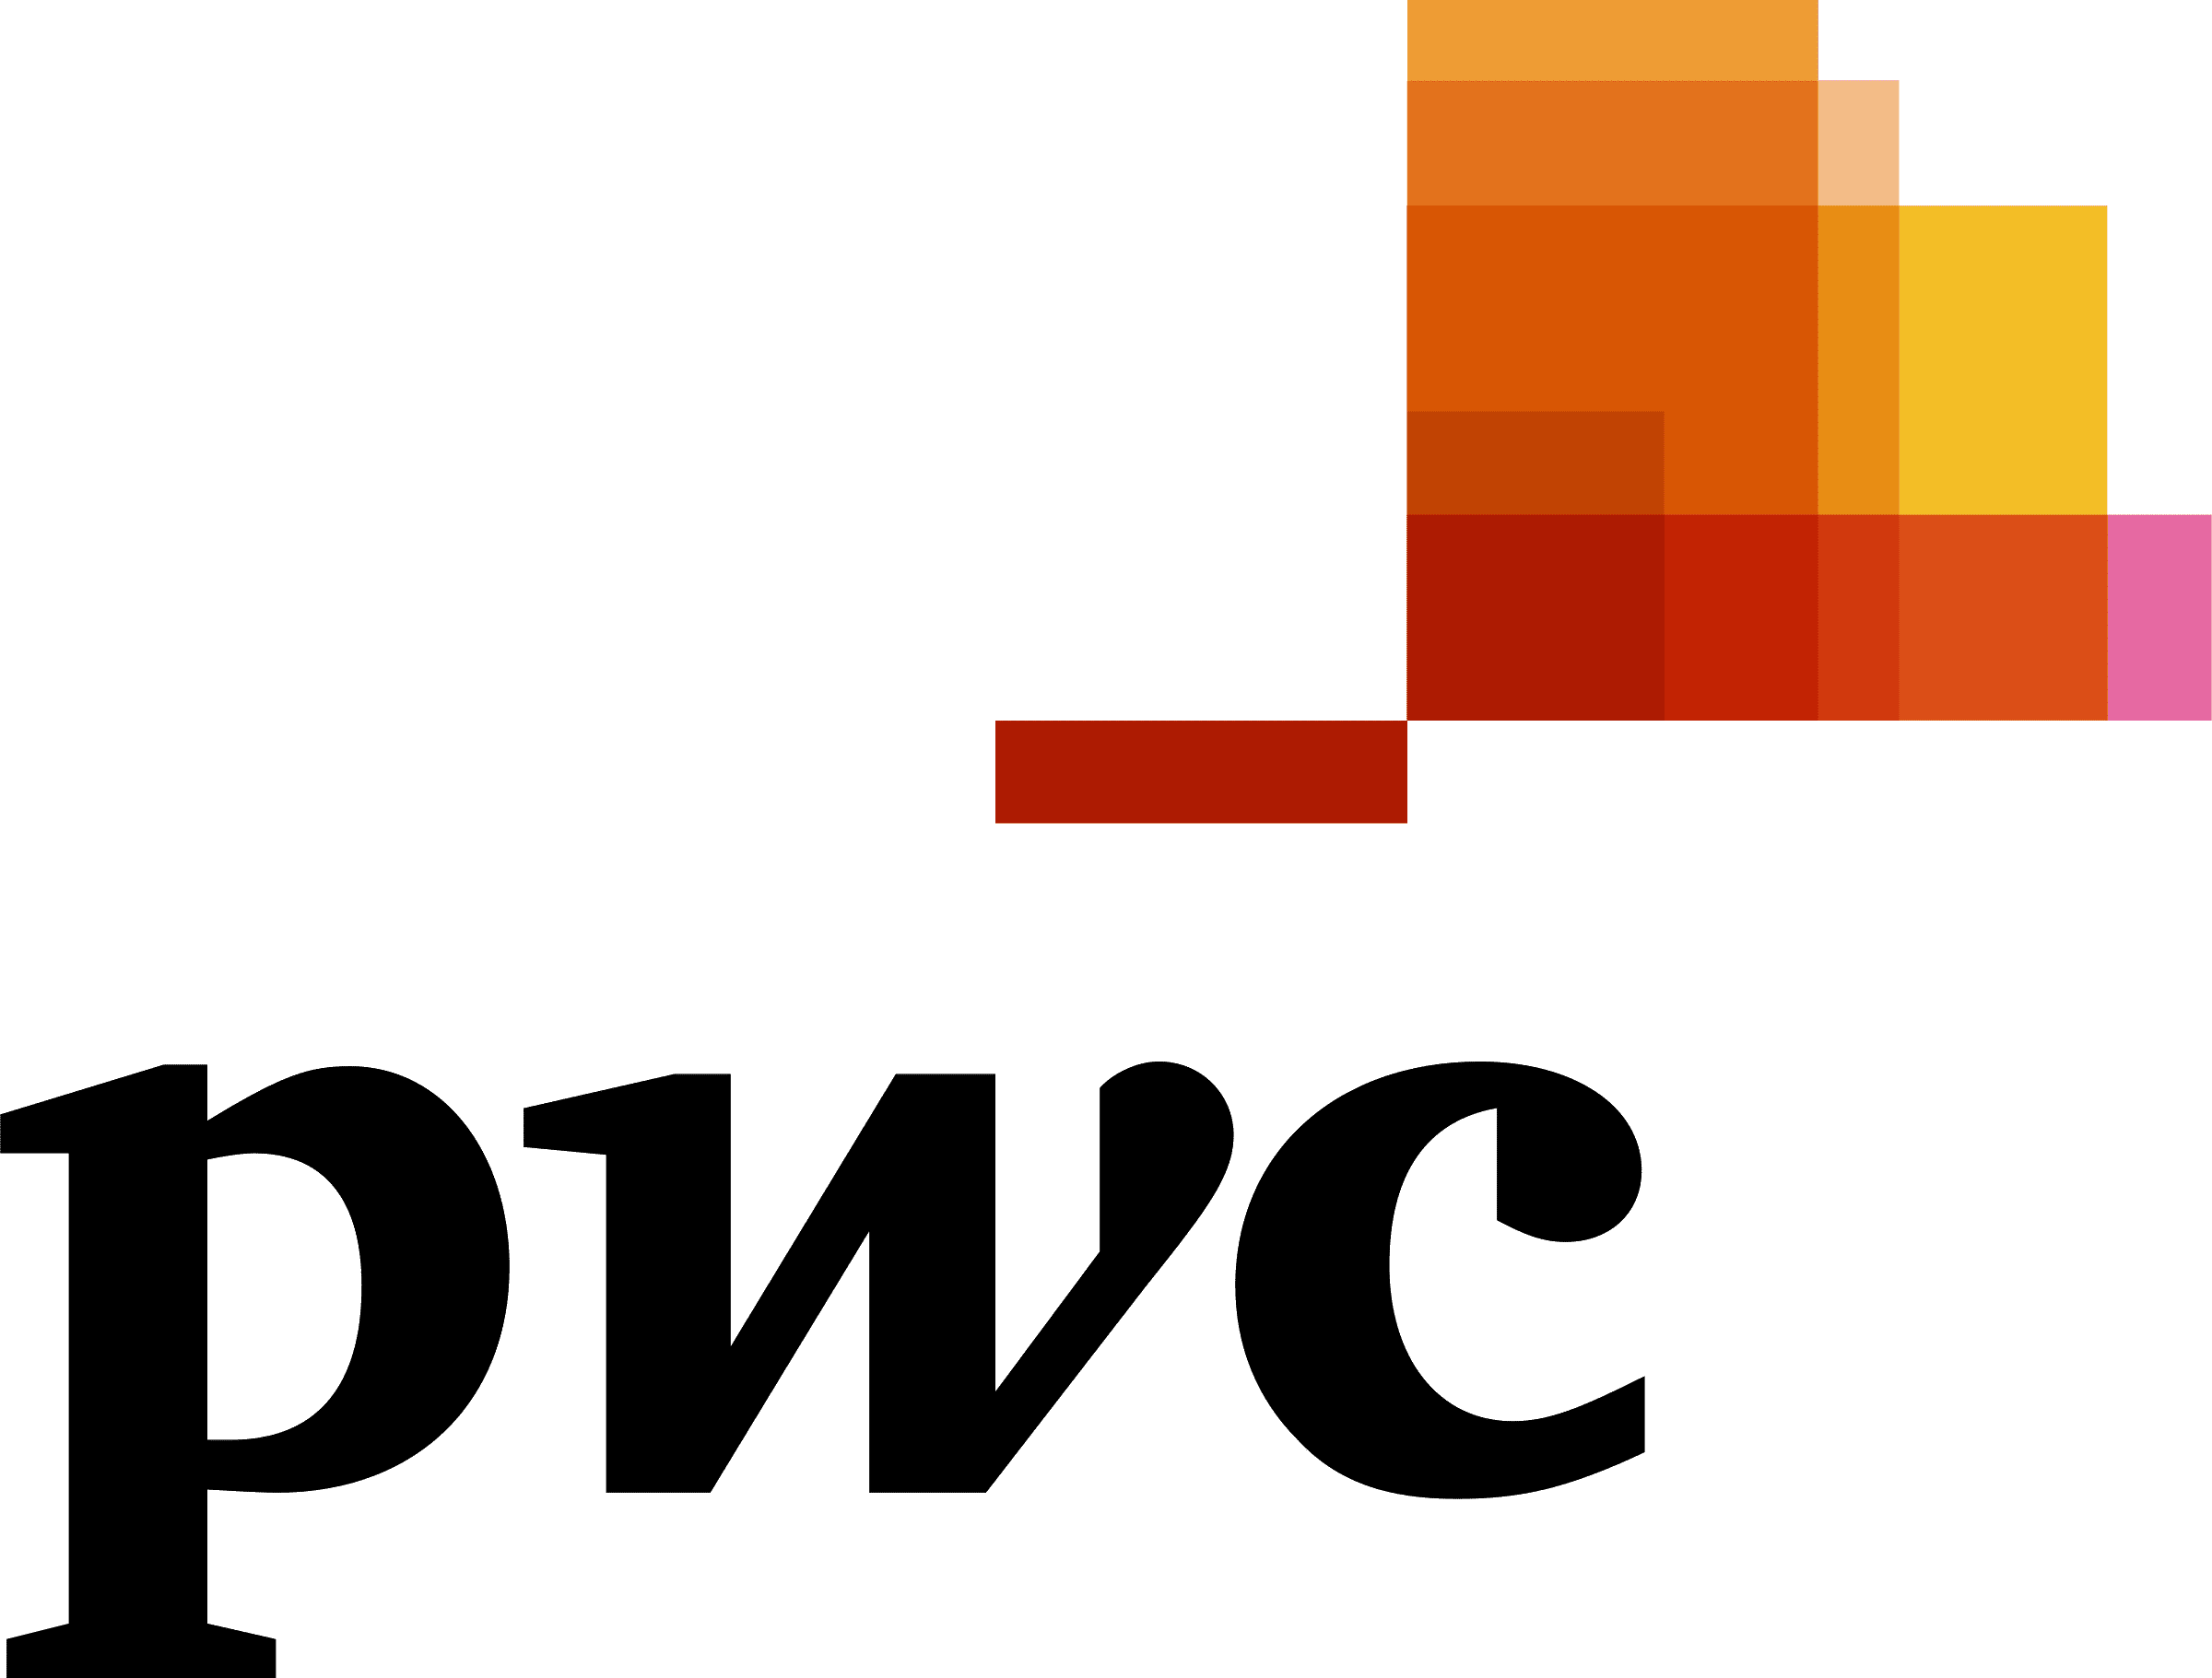 pwc logo by Interactive Entertainment Group, Inc.